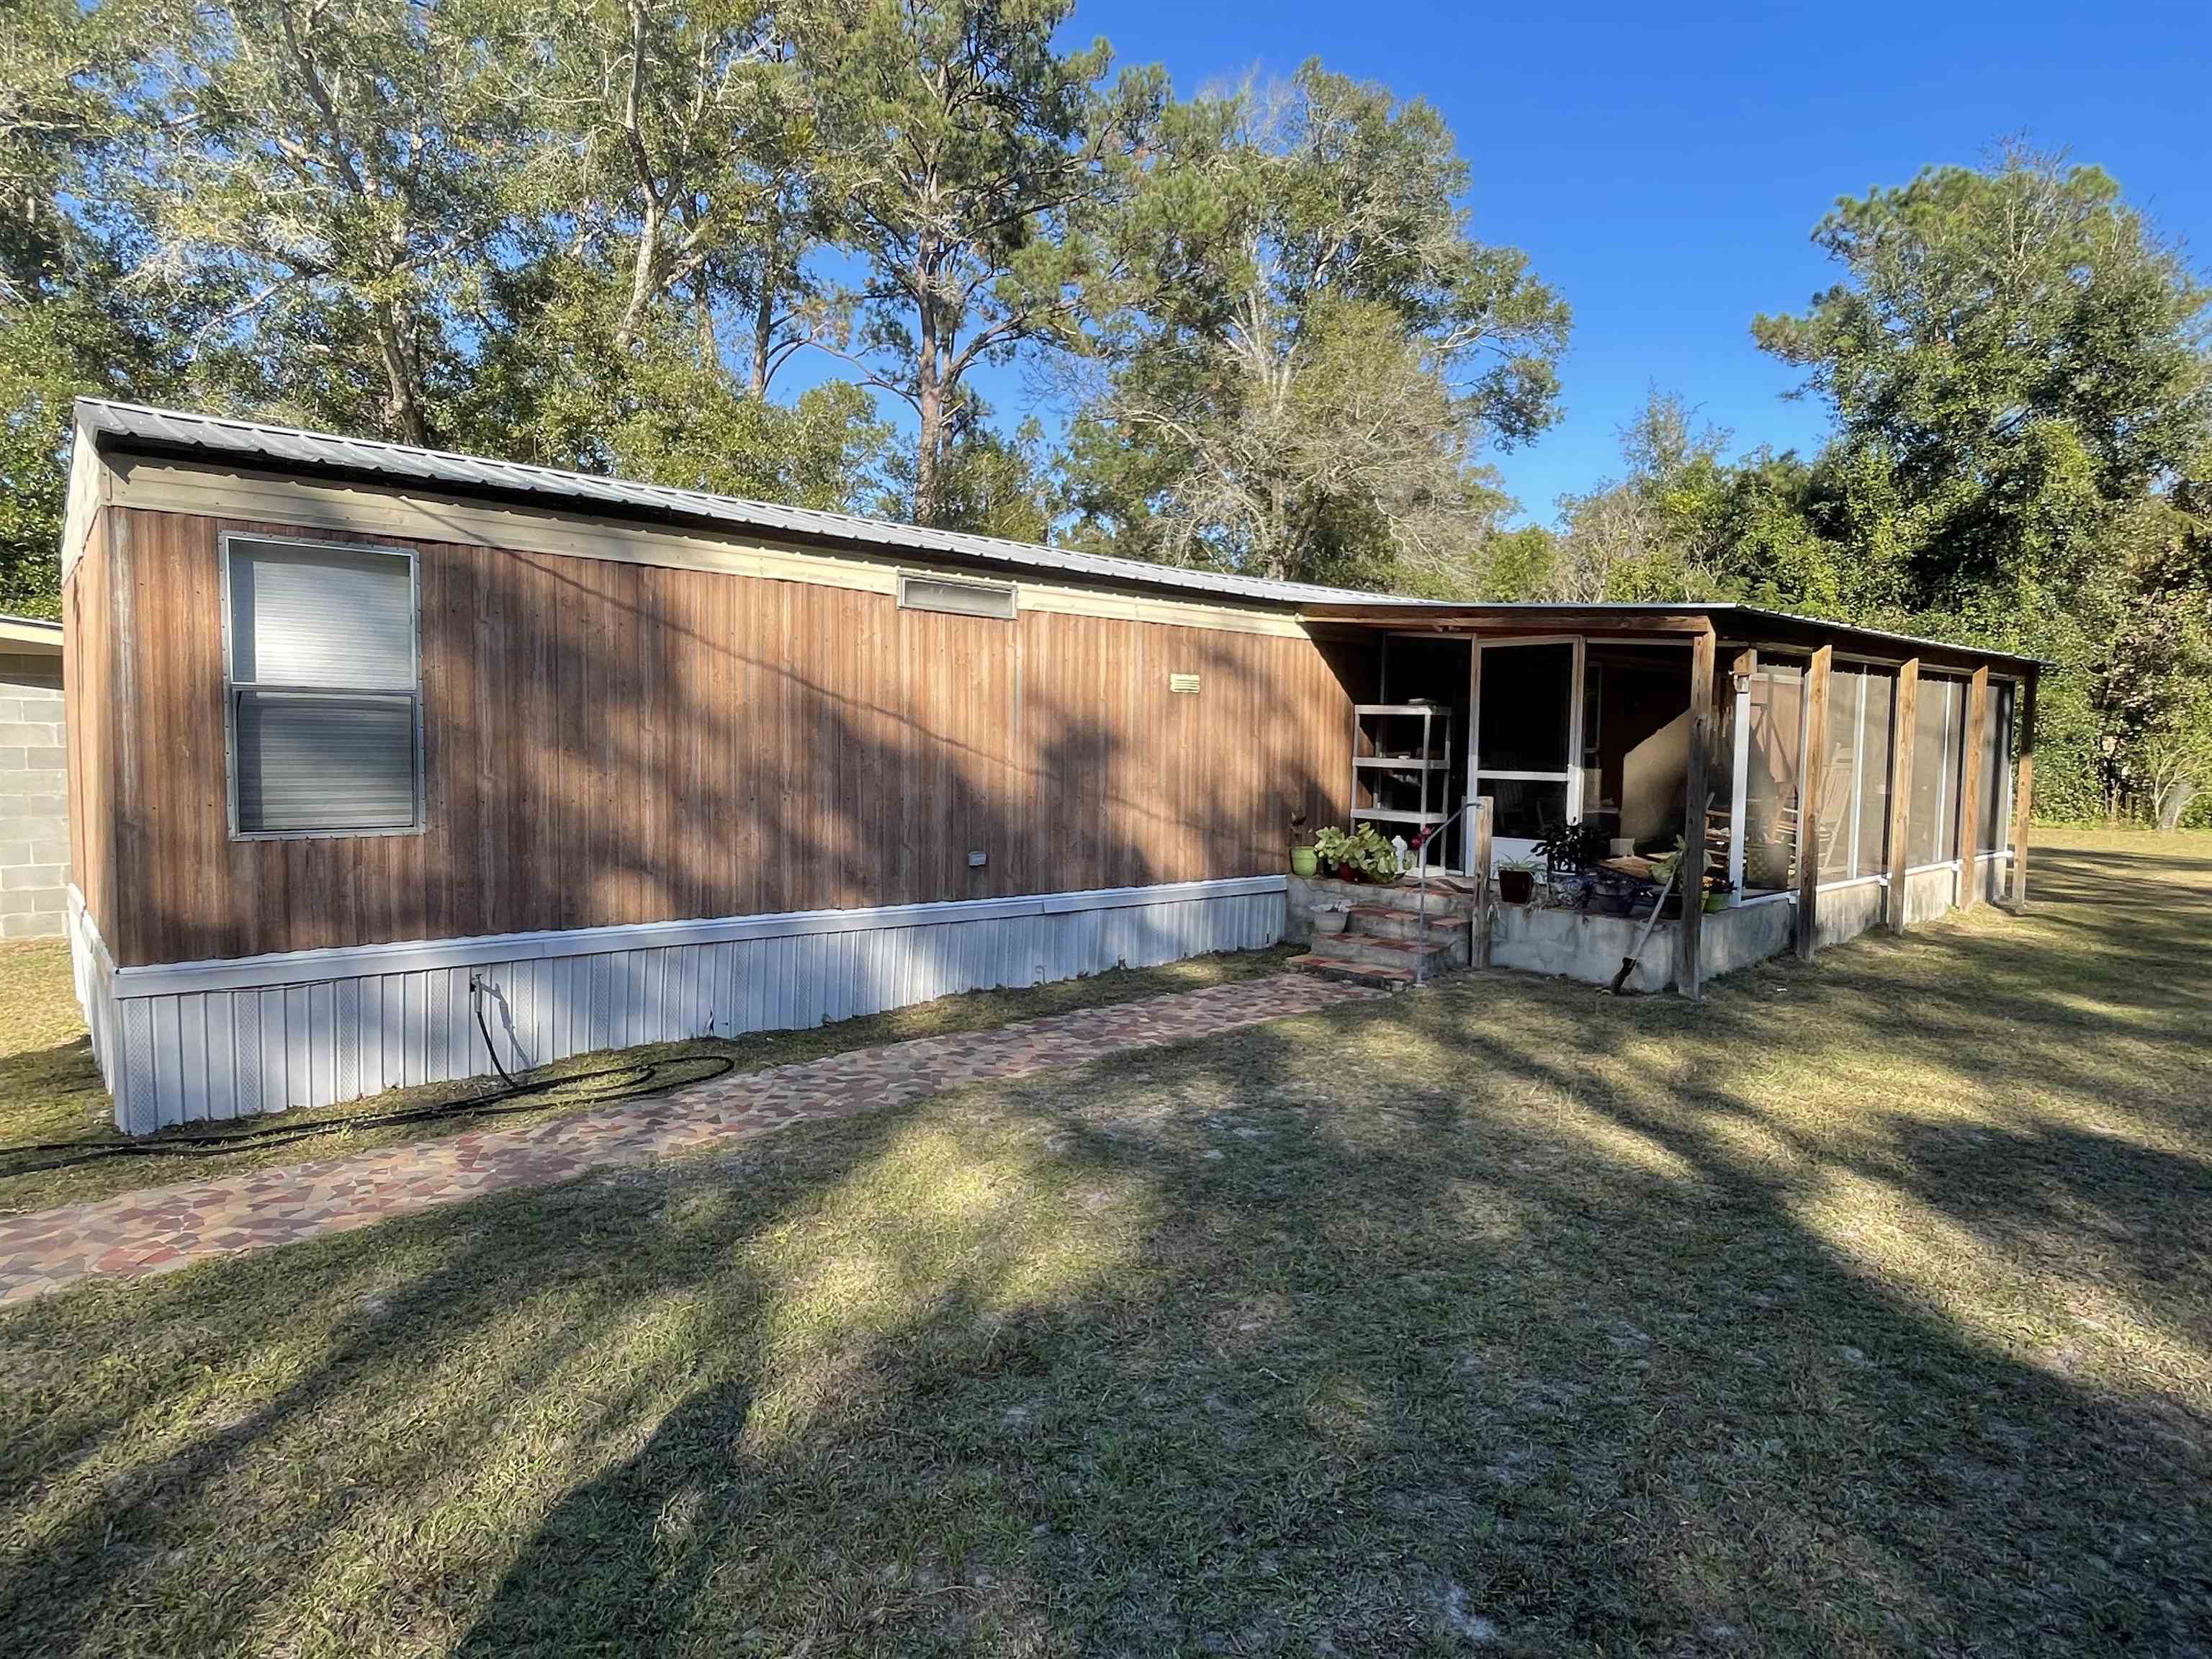 Are you looking for a peaceful and quite Neiborhood to call home? This is a one-of-a-kind property. The property comes fully furnished. A must see! The home is close to town and is 14 minutes from FSU's campus and shopping. The property sets just around the corner from Ochlocknee management area, where there are horse trails, hiking, hunting or nature watching. It also is right around the corner from Ochlocknee River boat ramp which will lead you to the world-famous Lake Talquin. The property also has a detached 4 car garage, with three garage doors and 1 open bay. The owner is putting in a new tile shower and will be done before closing. Property might be eligible for USDA loan 100% Financing.